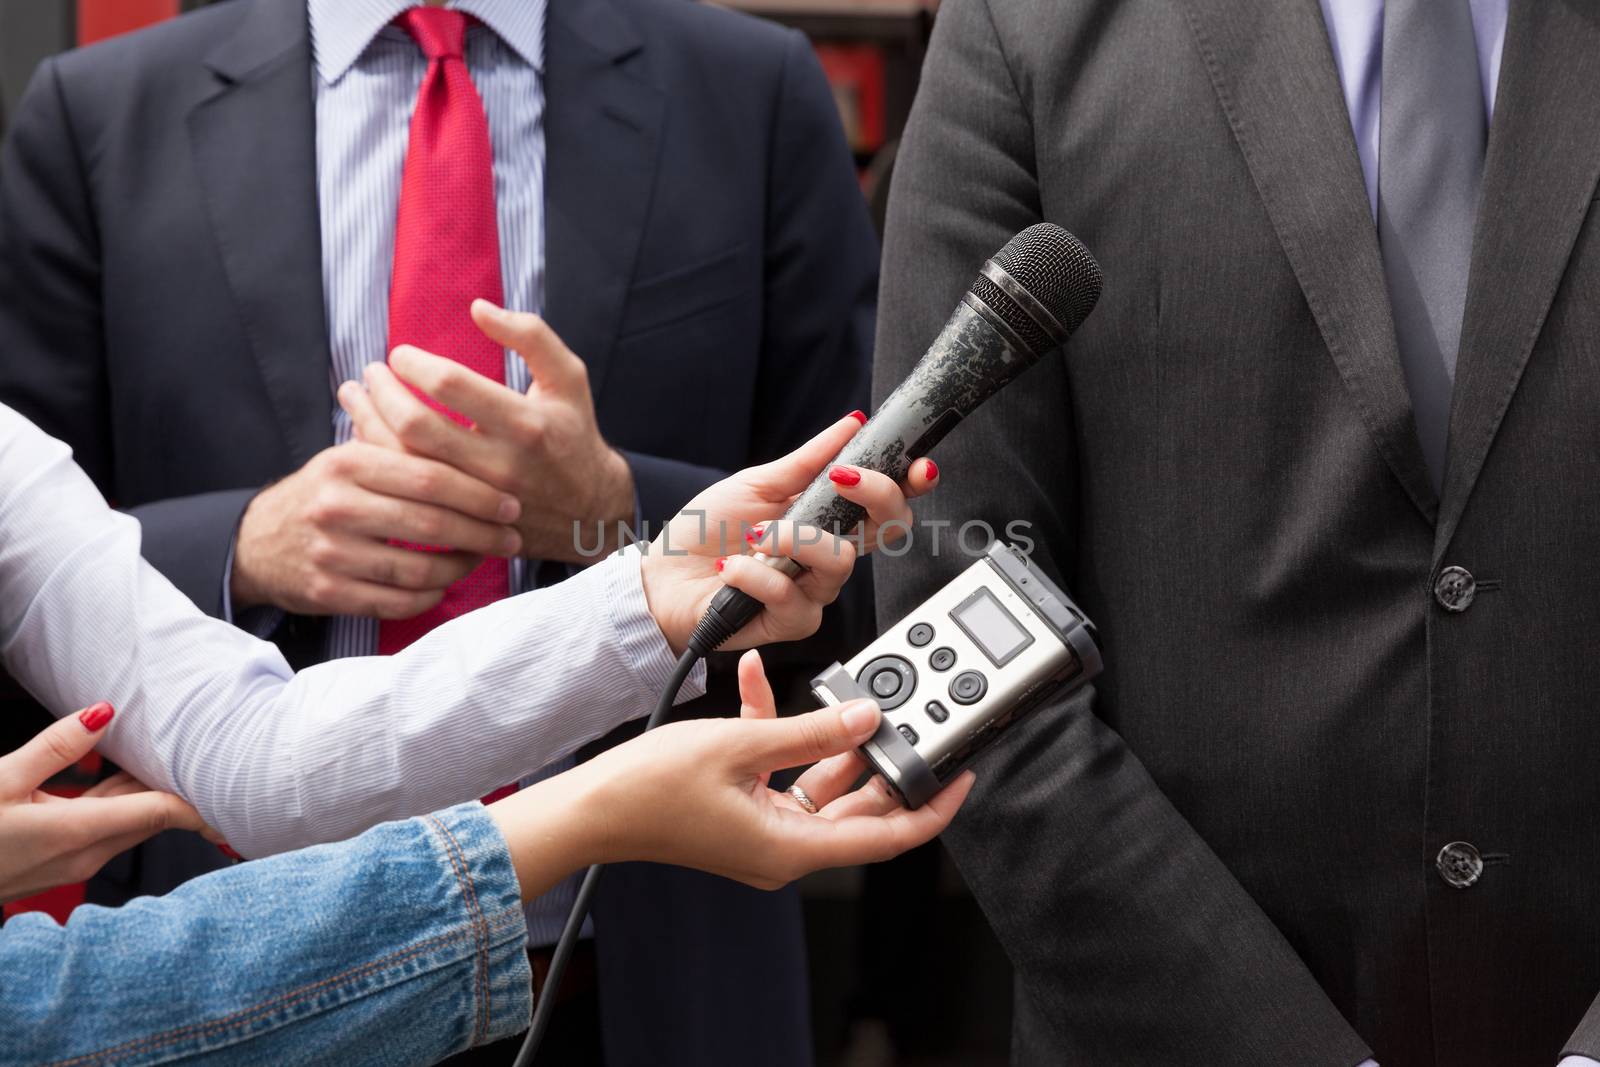 Journalists making interview with businessperson or politician